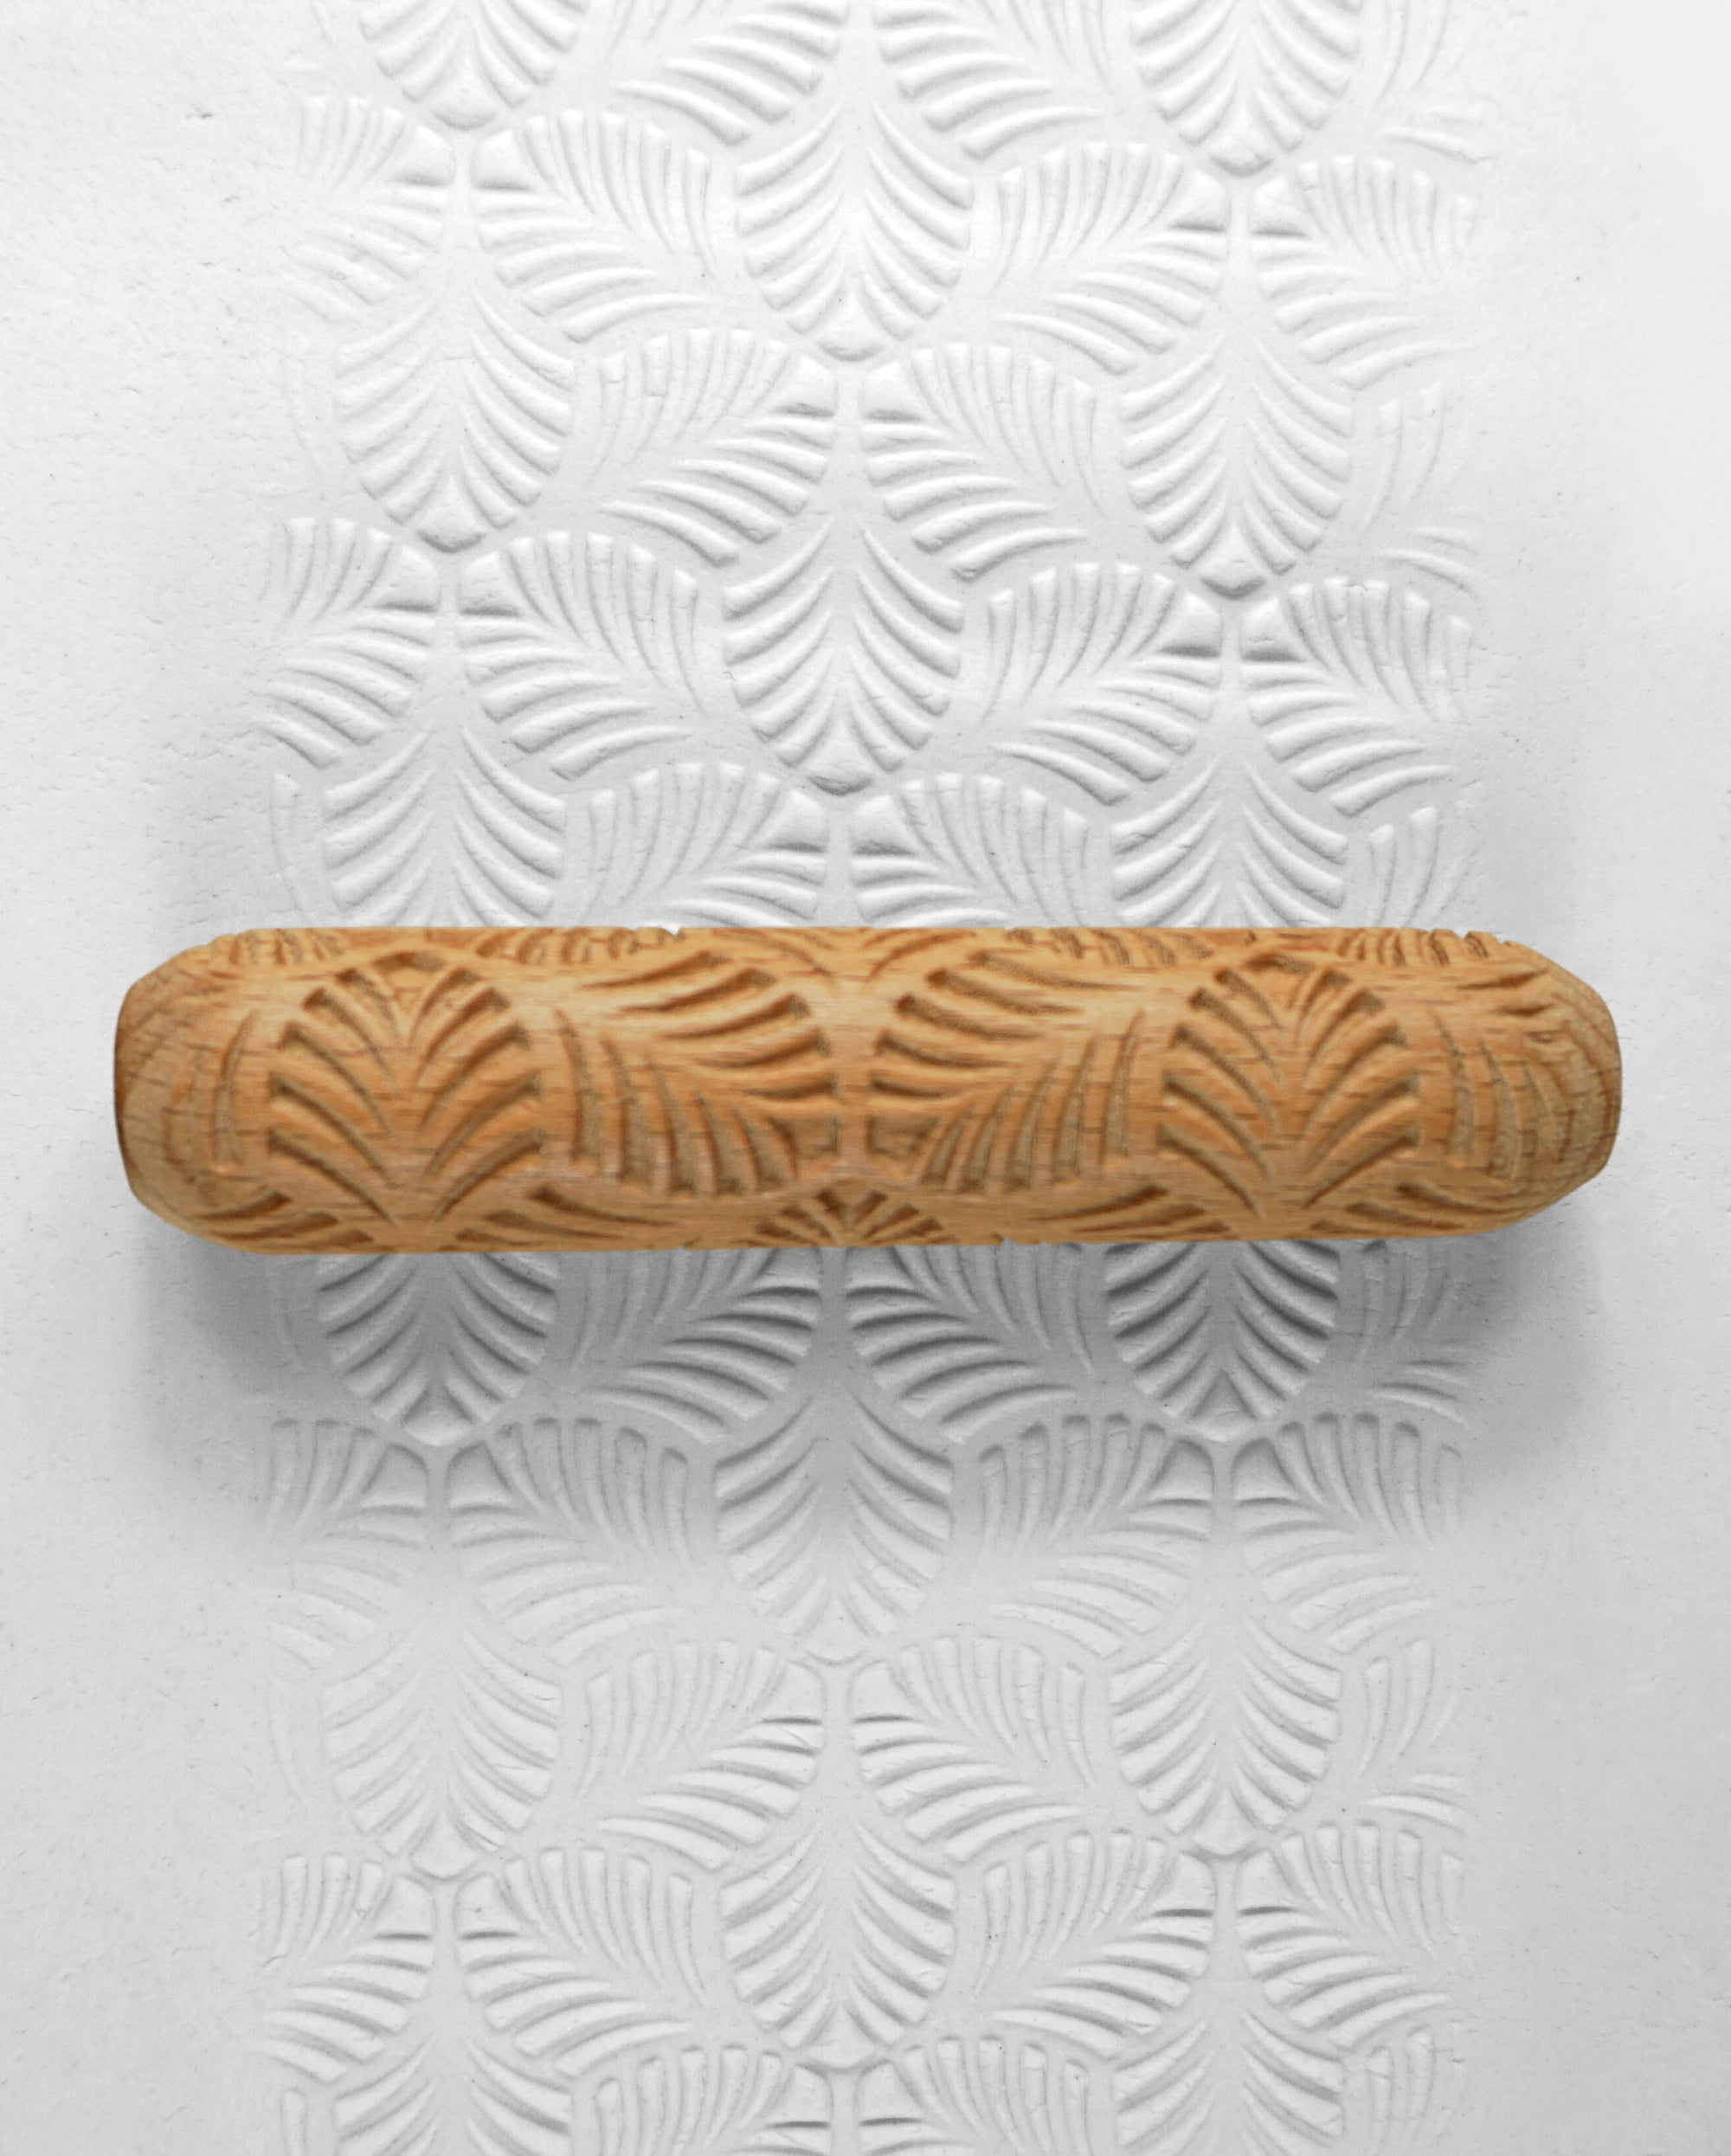 Clay Texture Roller - Palm Leaf